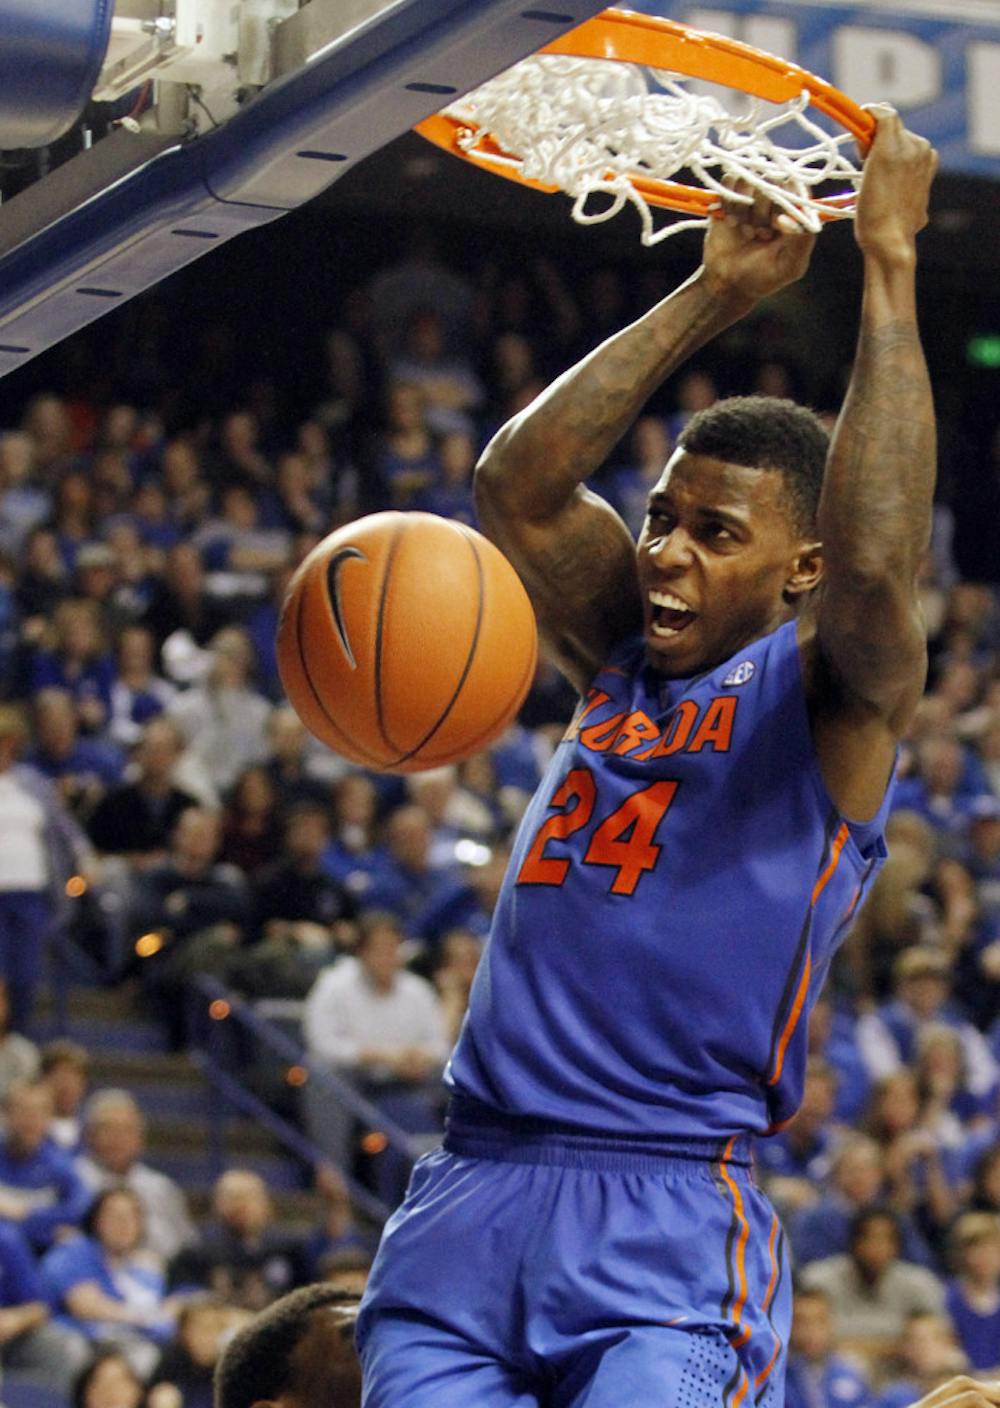 <p>Senior forward Casey Prather dunks during the second half of Florida’s 69-59 win against Kentucky on Saturday in Rupp Arena in Lexington, Ky.</p>